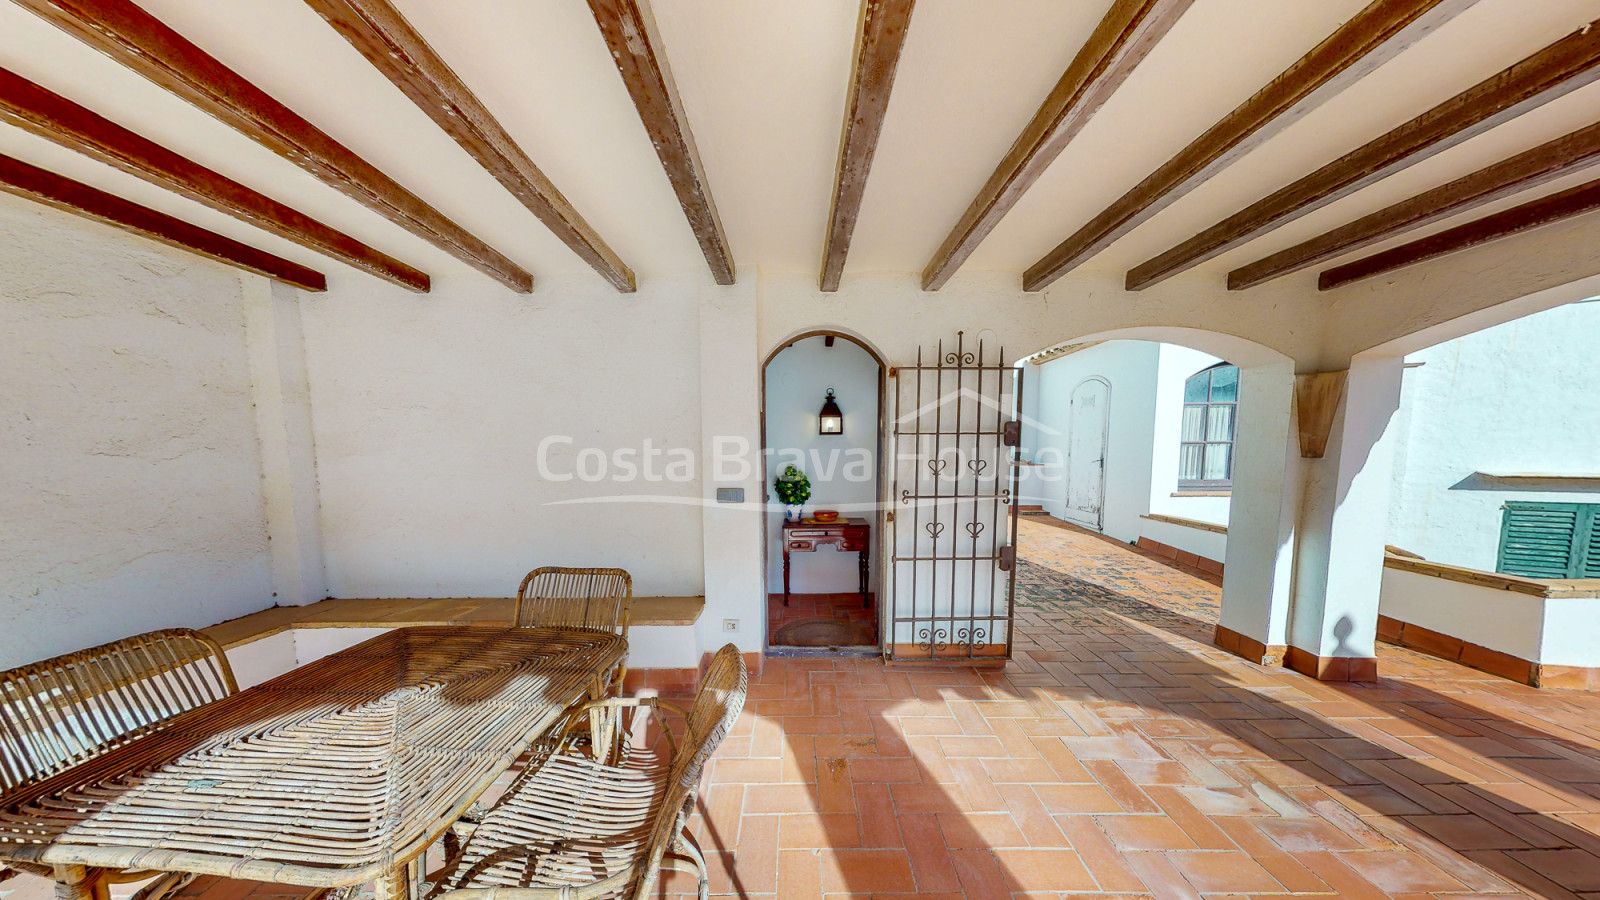 House for sale in Sa Tuna (Begur) a few steps from the beach, with stunning sea views